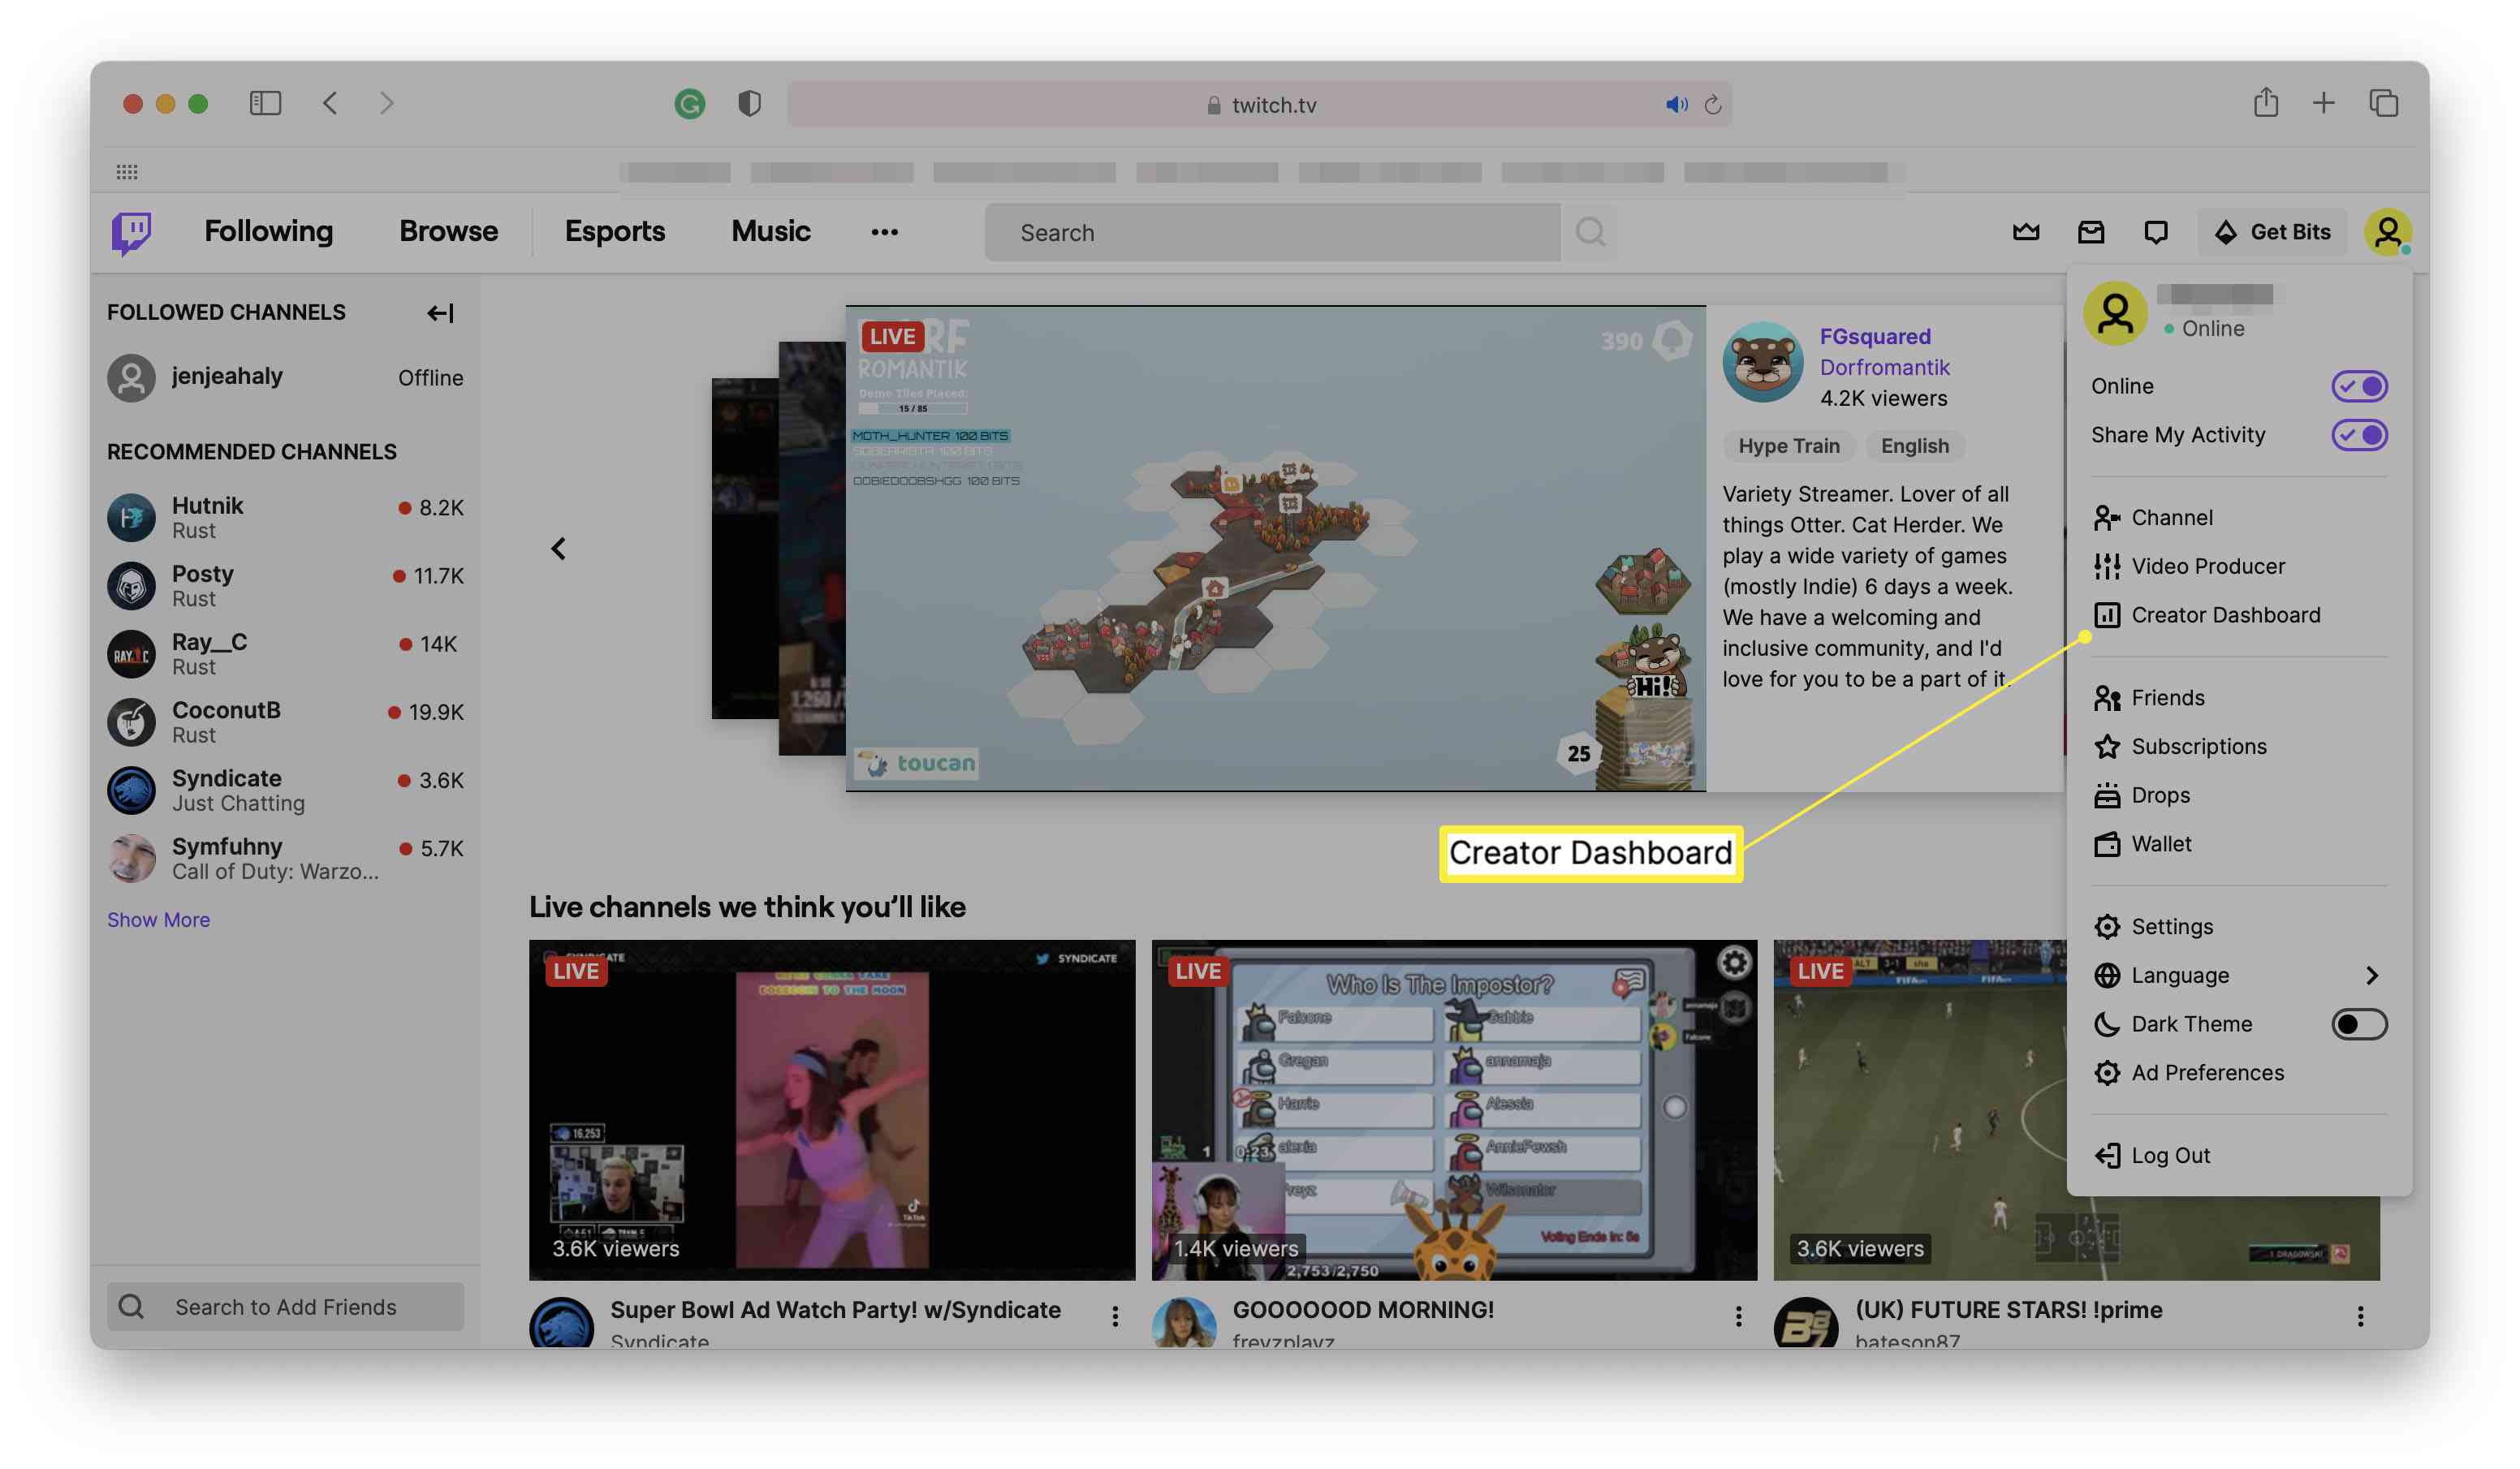 Twitch homepage with Creator Dashboard highlighted